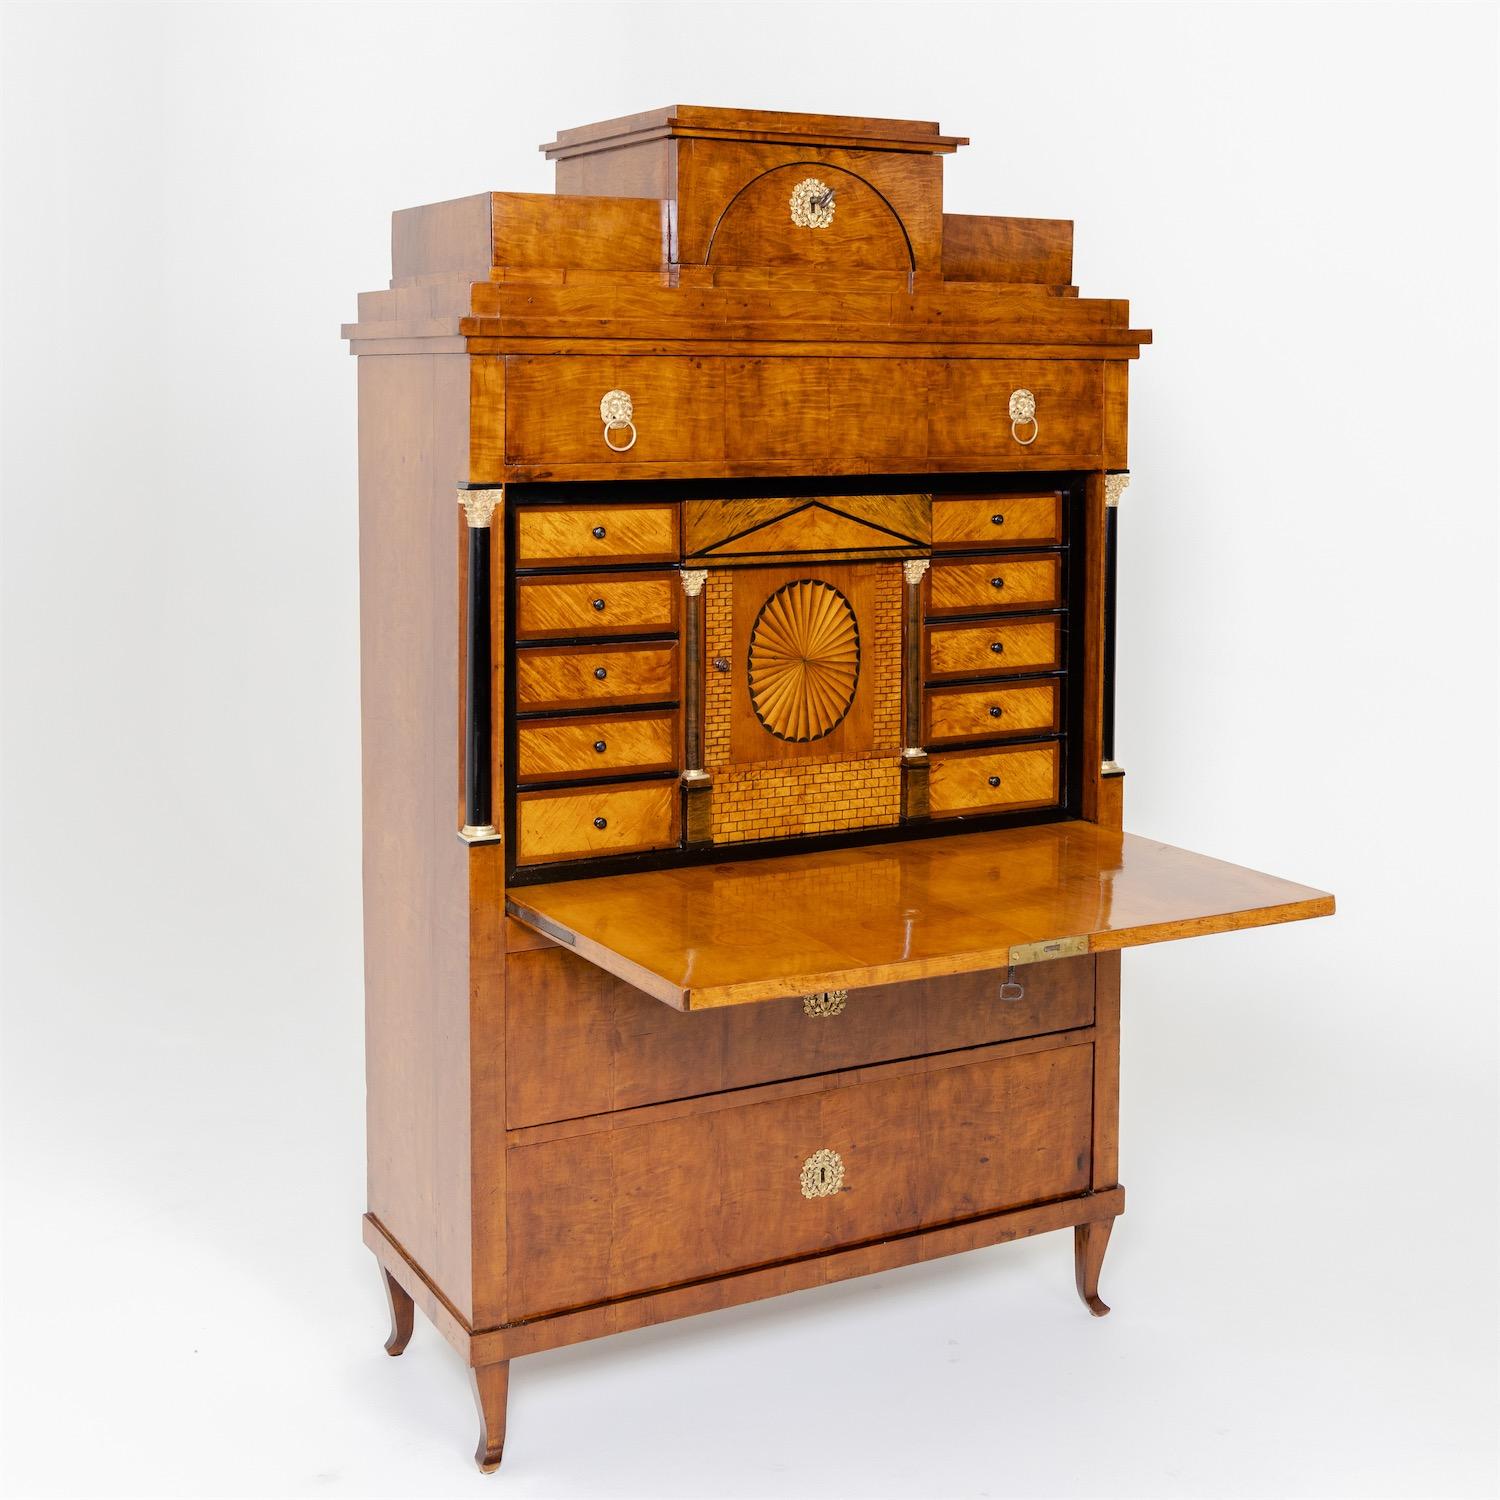 A straight corpus with folding writing flap and wide top drawer rises above a two-drawer base, standing on slightly outwardly curved square feet and is crowned by a stepped pediment with one drawer and segmental arch decoration. The ebonized half